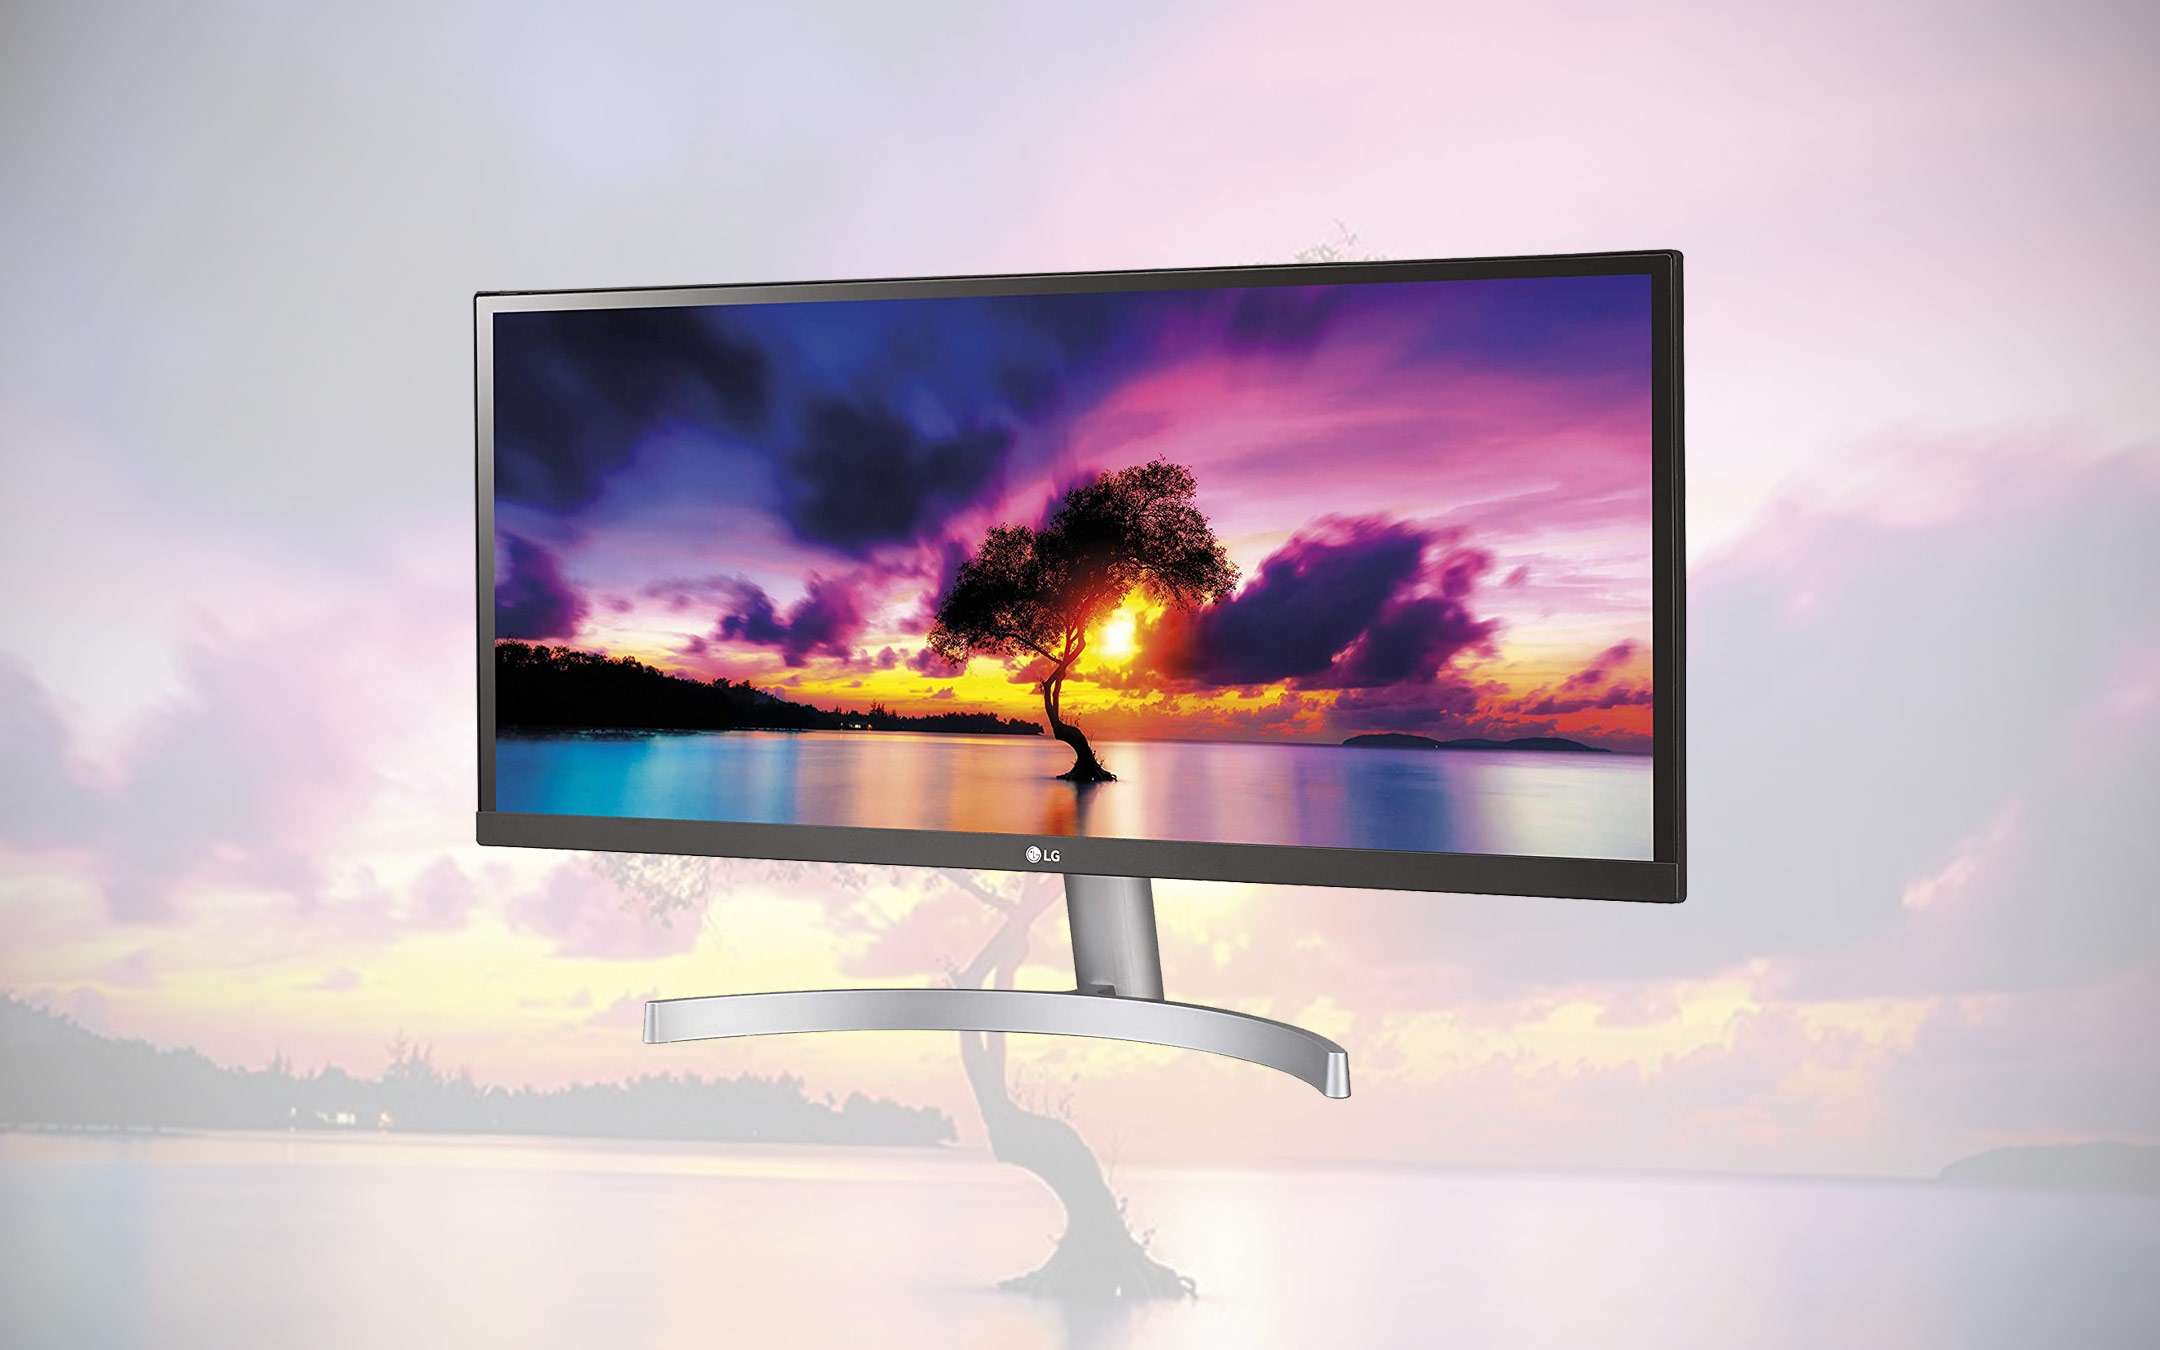 LG ultrawide 29 inch monitor on offer at -33% - SportsGaming.win